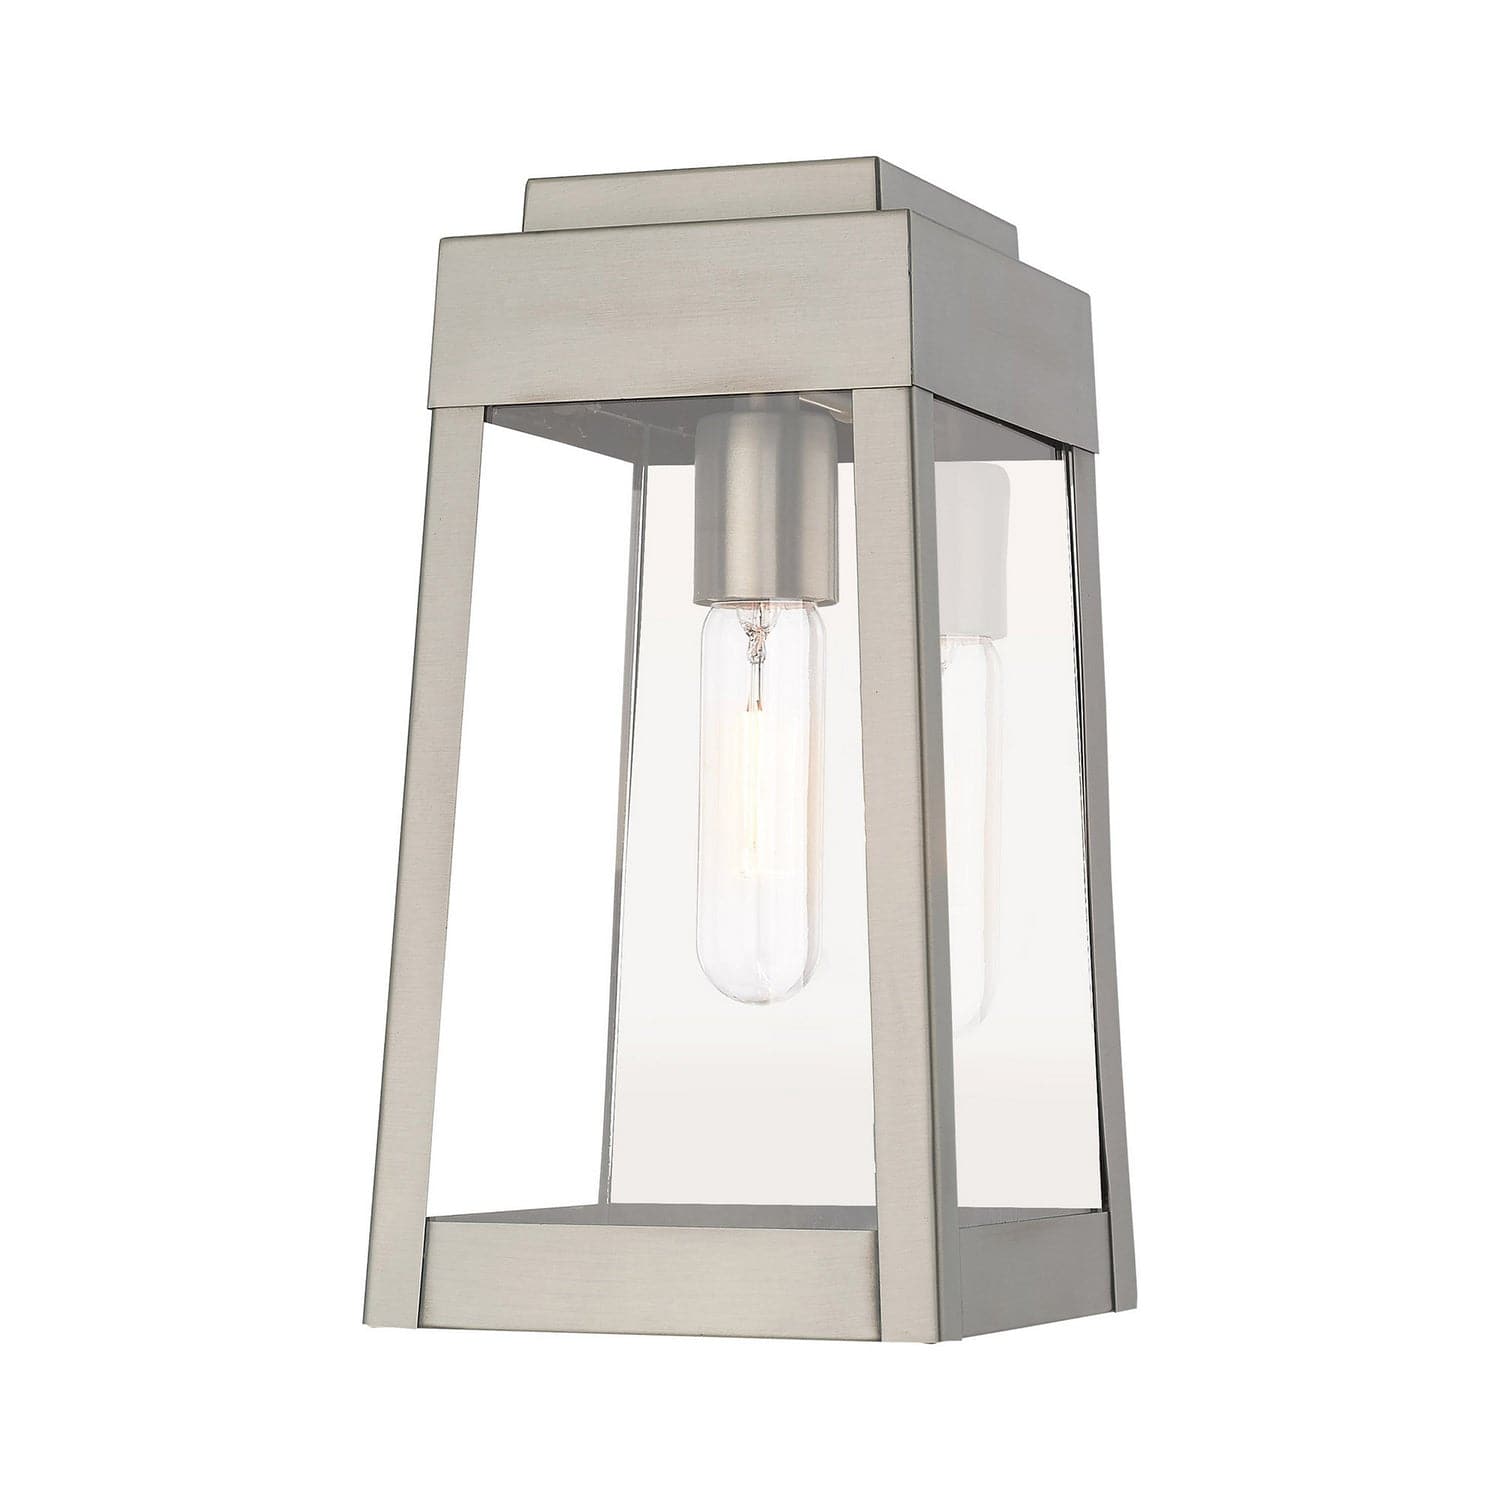 Livex Lighting - 20852-91 - One Light Outdoor Wall Lantern - Oslo - Brushed Nickel w/ Polished Chrome Stainless Steel